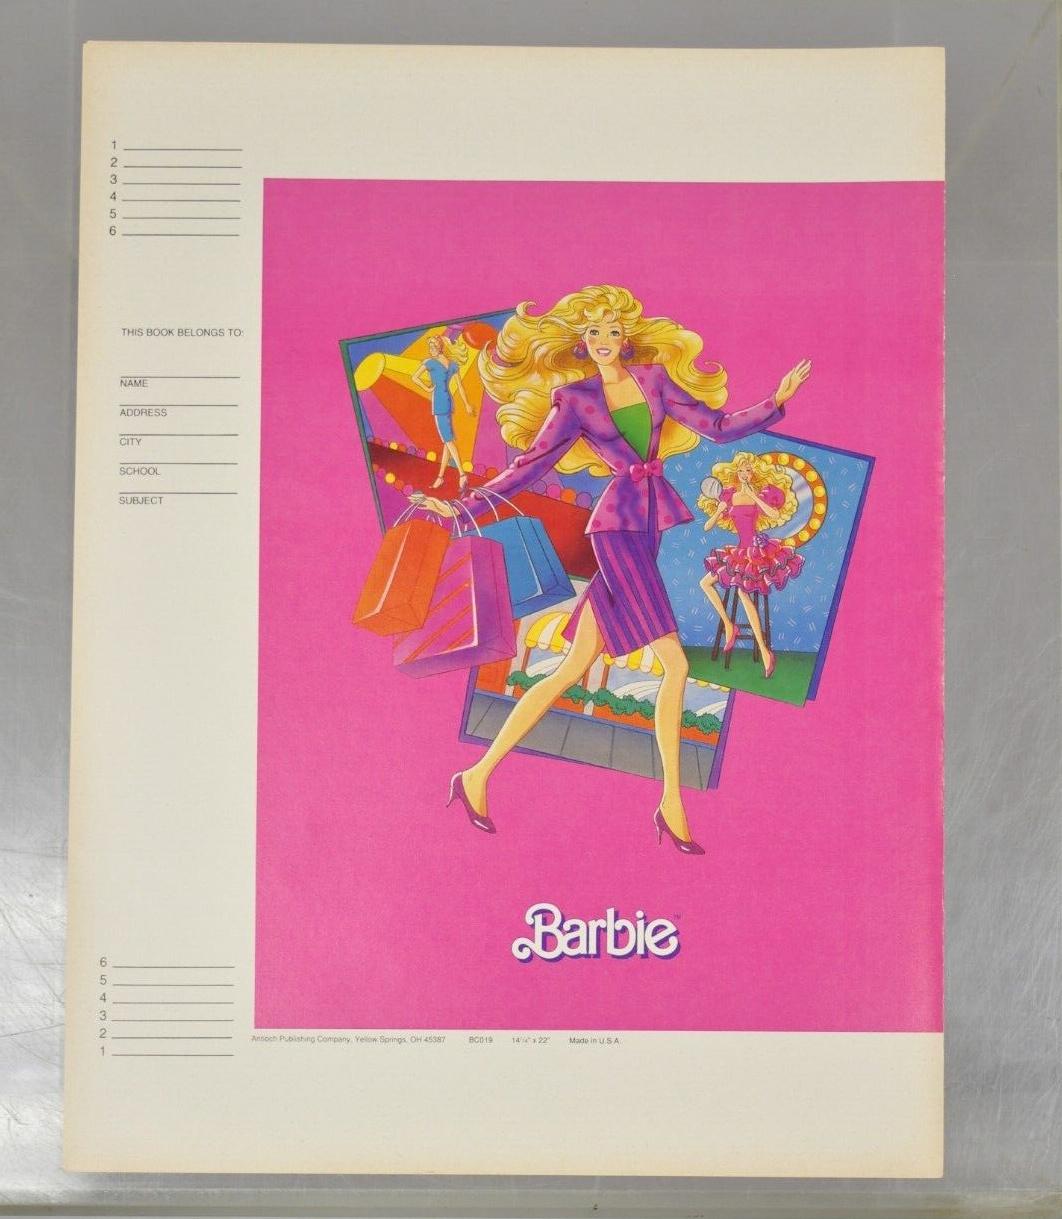 Vintage 1989 Barbie Mattel Original Pink Paper Book Covers NOS - Many Available In Good Condition For Sale In Philadelphia, PA